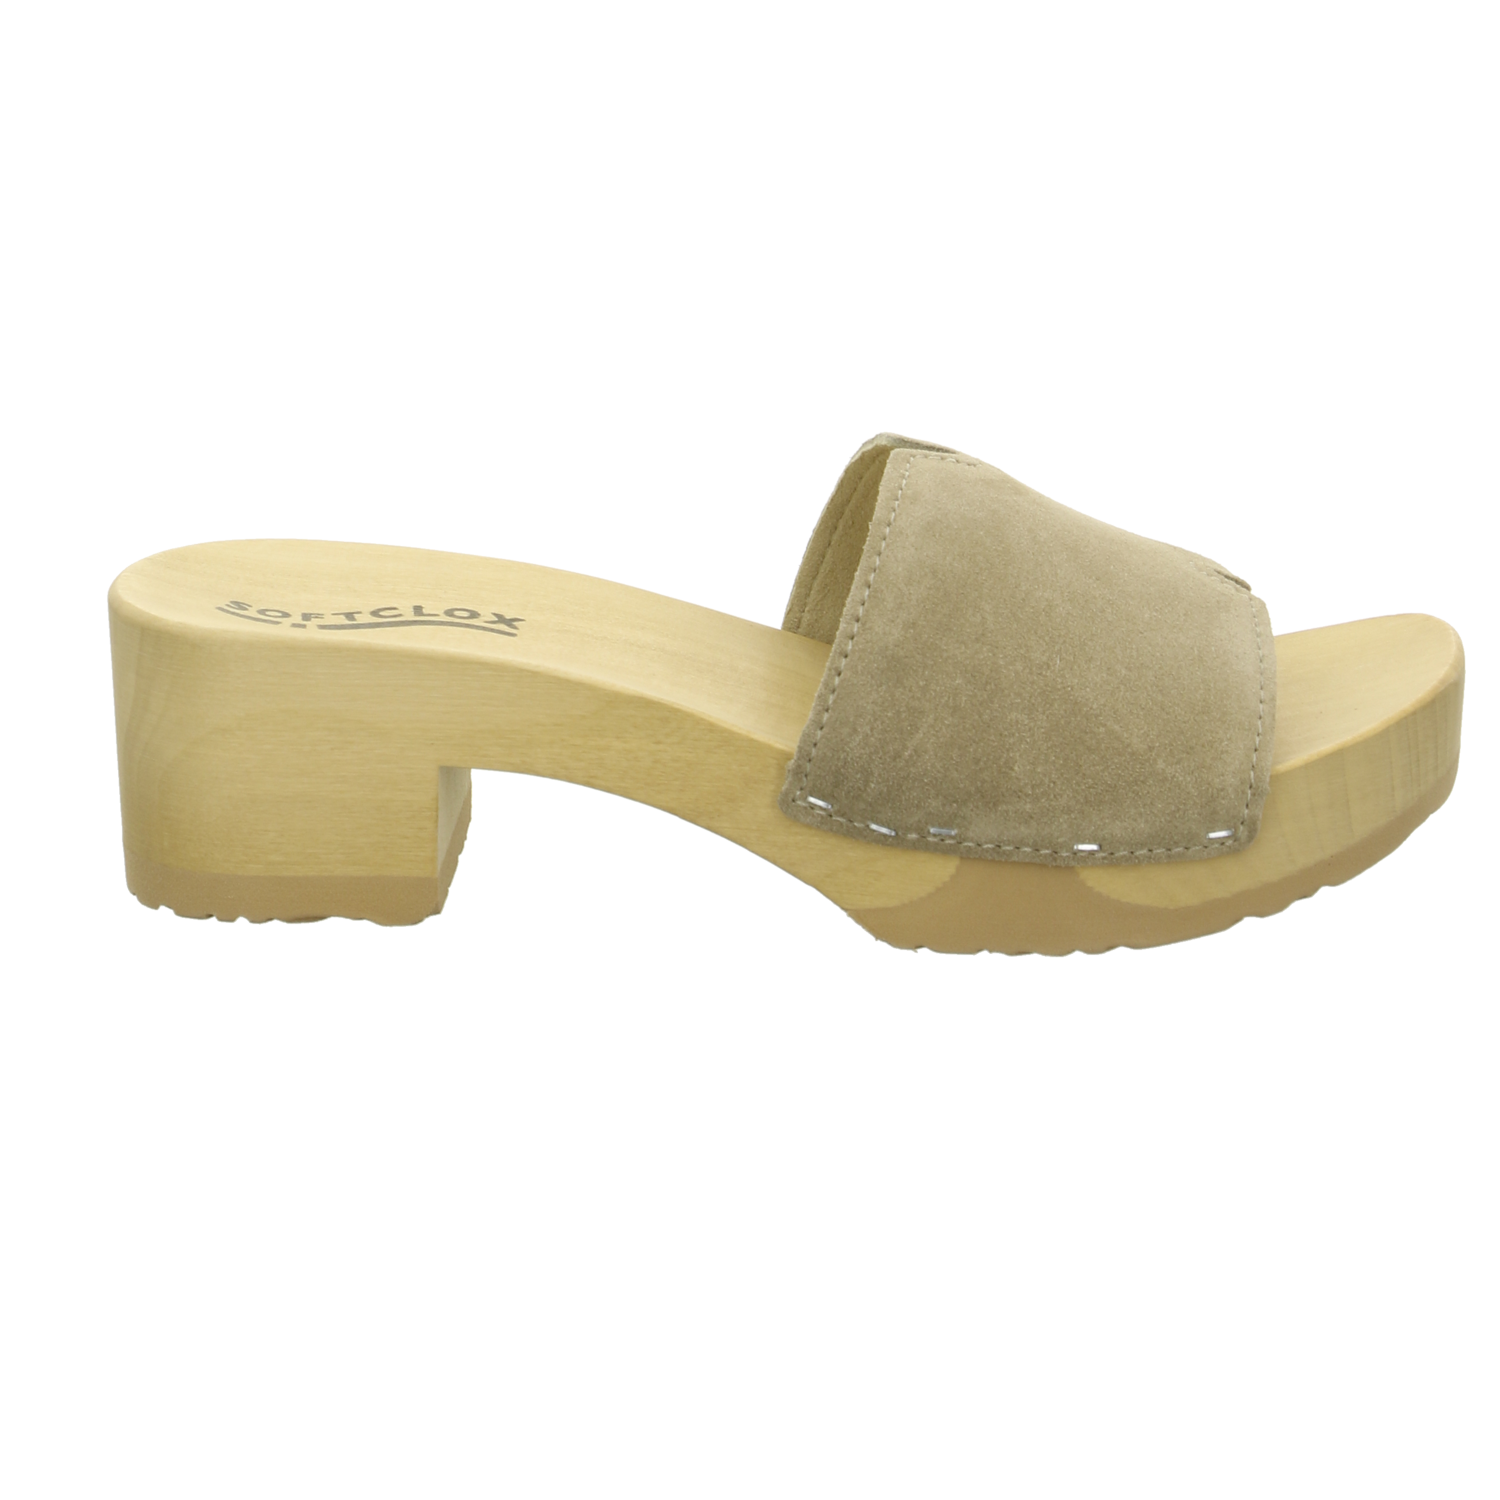 Softclox Pantolette bis 25 mm taupe